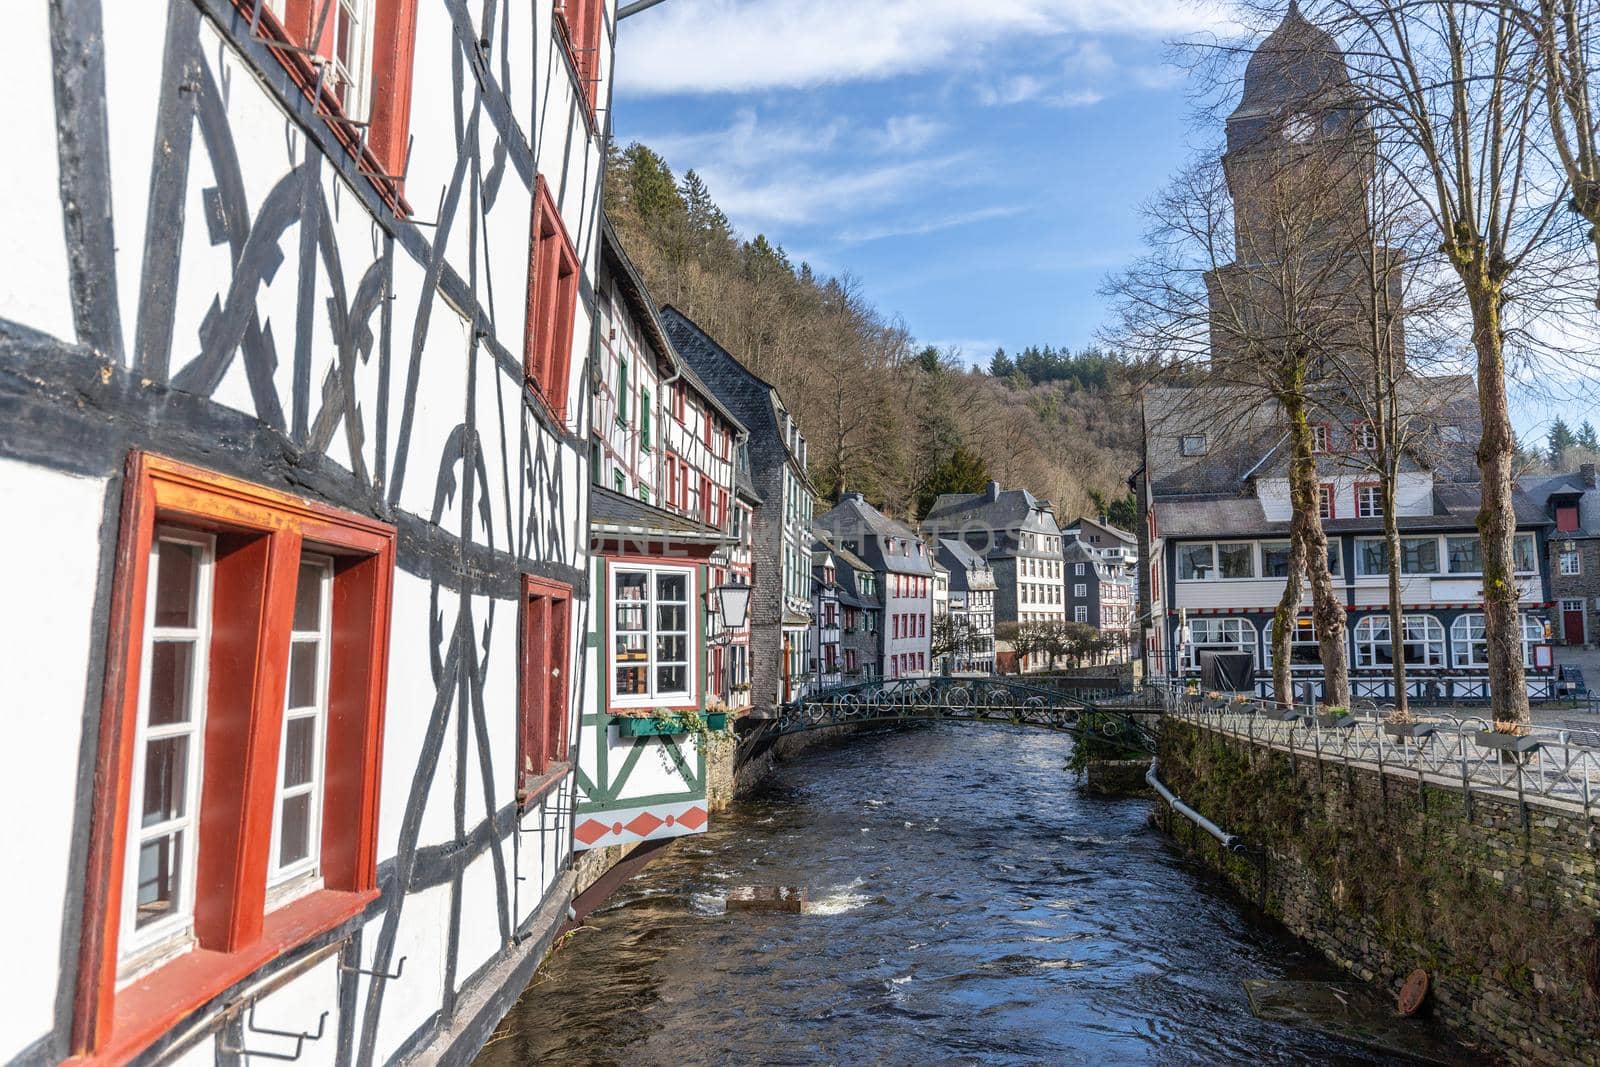 Half-timbered houses along the rur river in Monschau, by reinerc